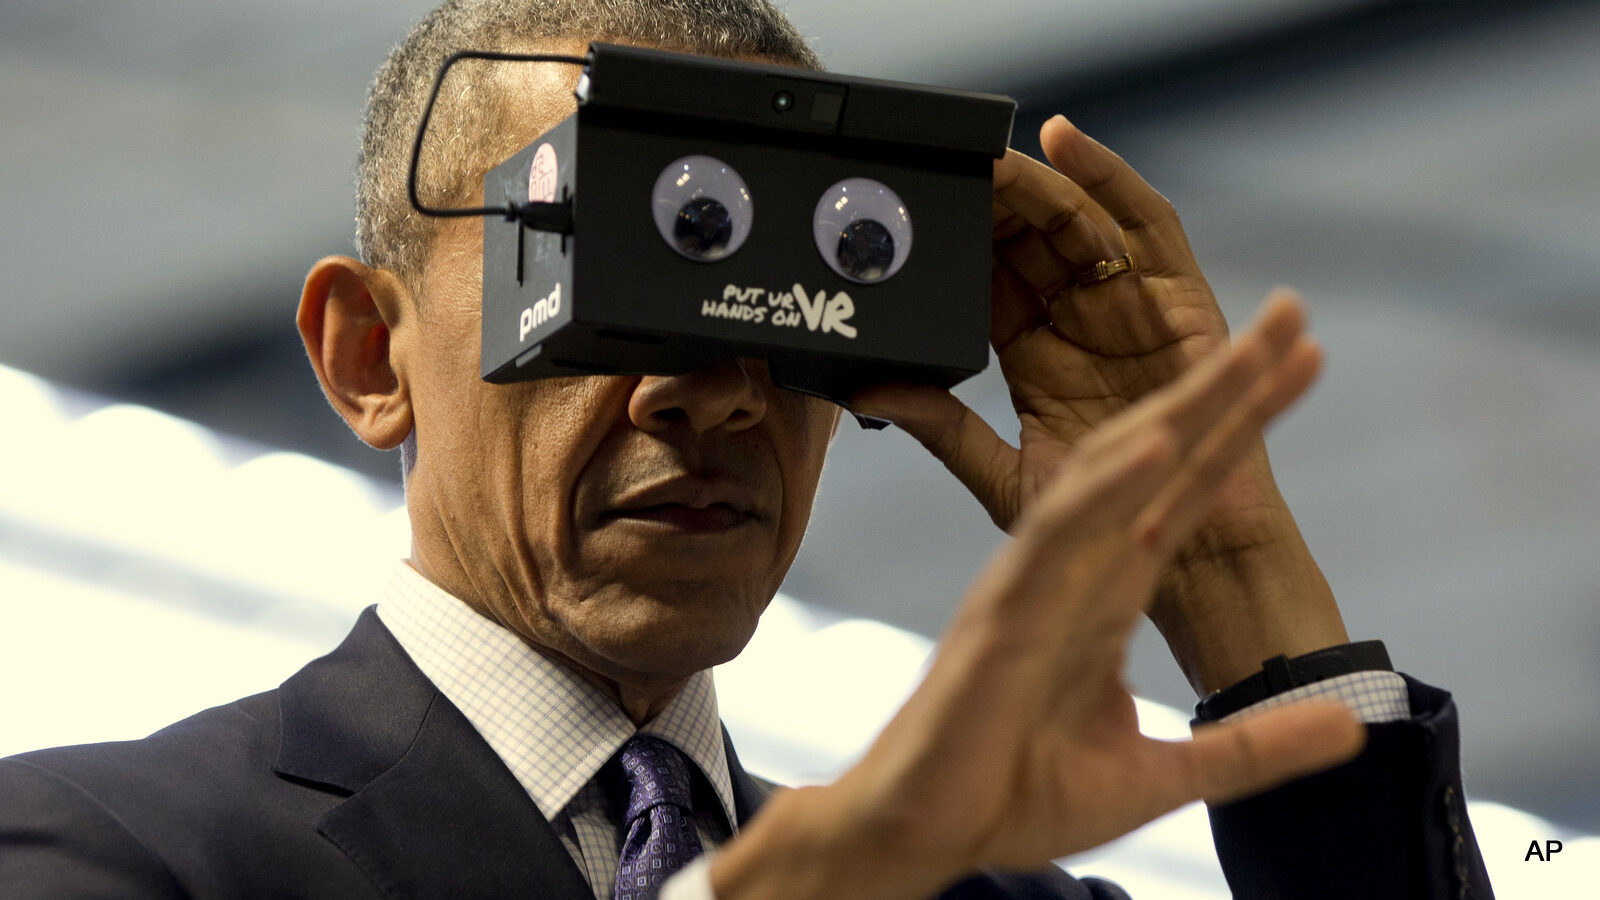 U.S. President Barack Obama looks at his hand as he tests VR goggles when touring the Hannover Messe, the world's largest industrial technology trade fair, in Hannover, northern Germany, Monday, April 25, 2016. Obama is on a two-day official visit to Germany. (AP Photo/Carolyn Kaster)